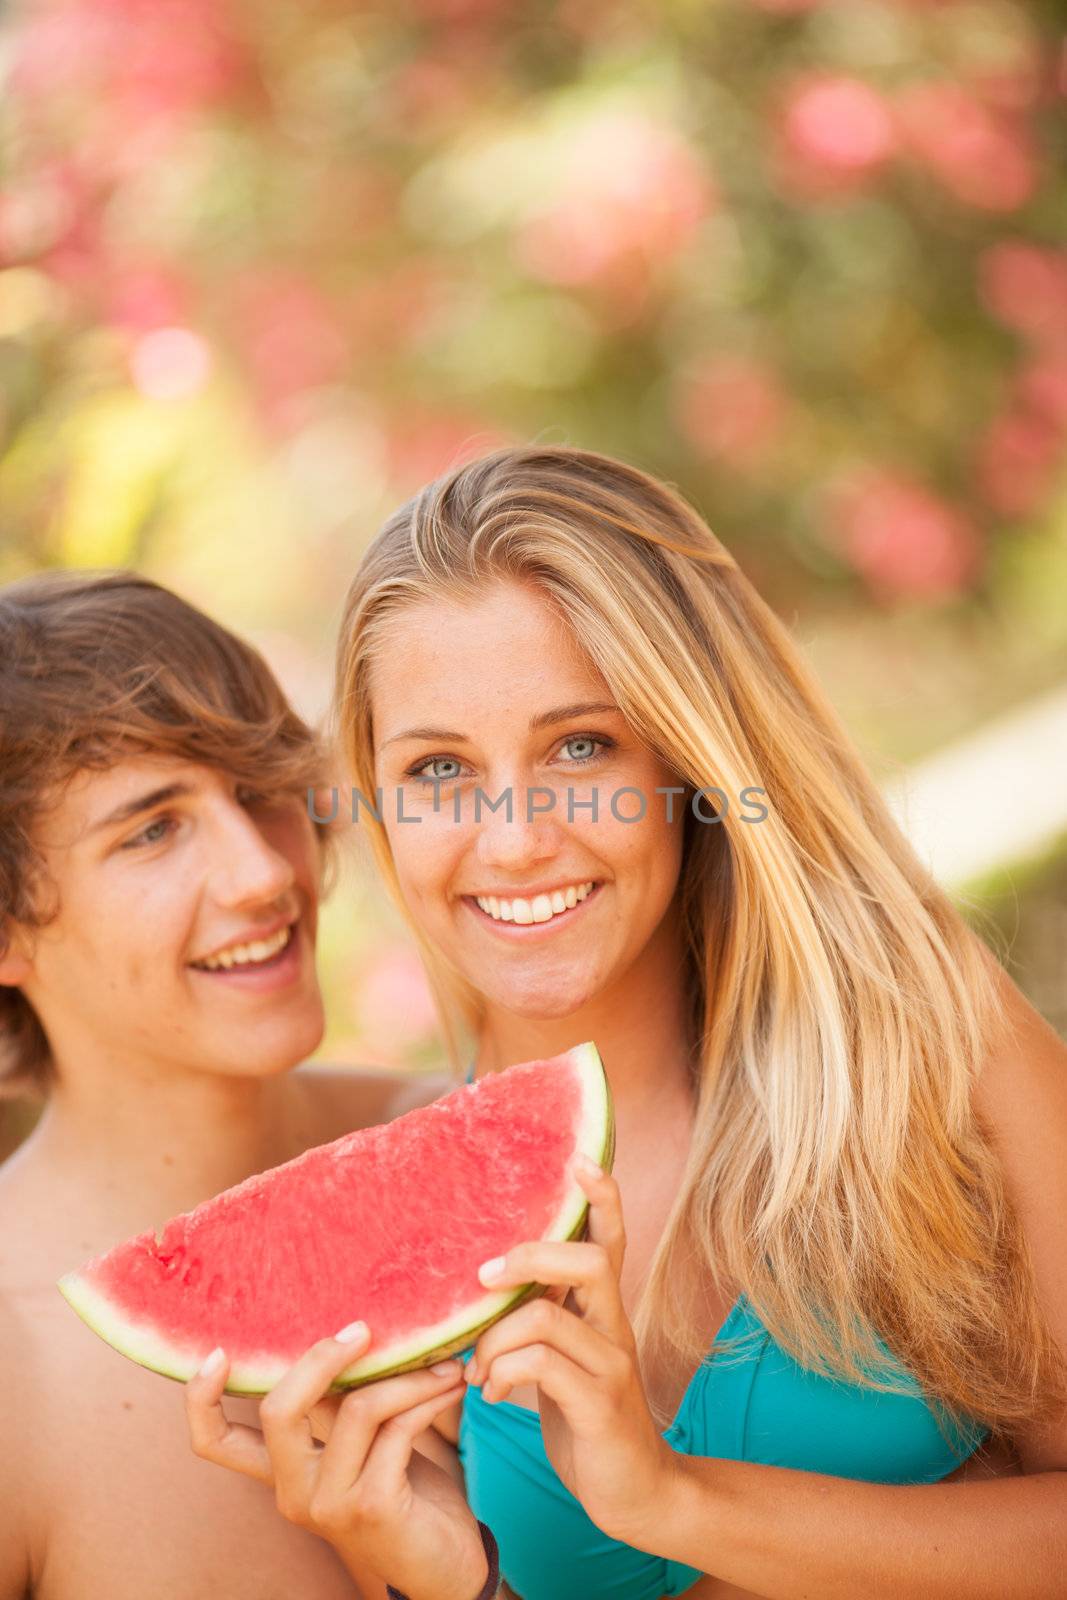 Portrait of a young beautiful couple eating watermelon